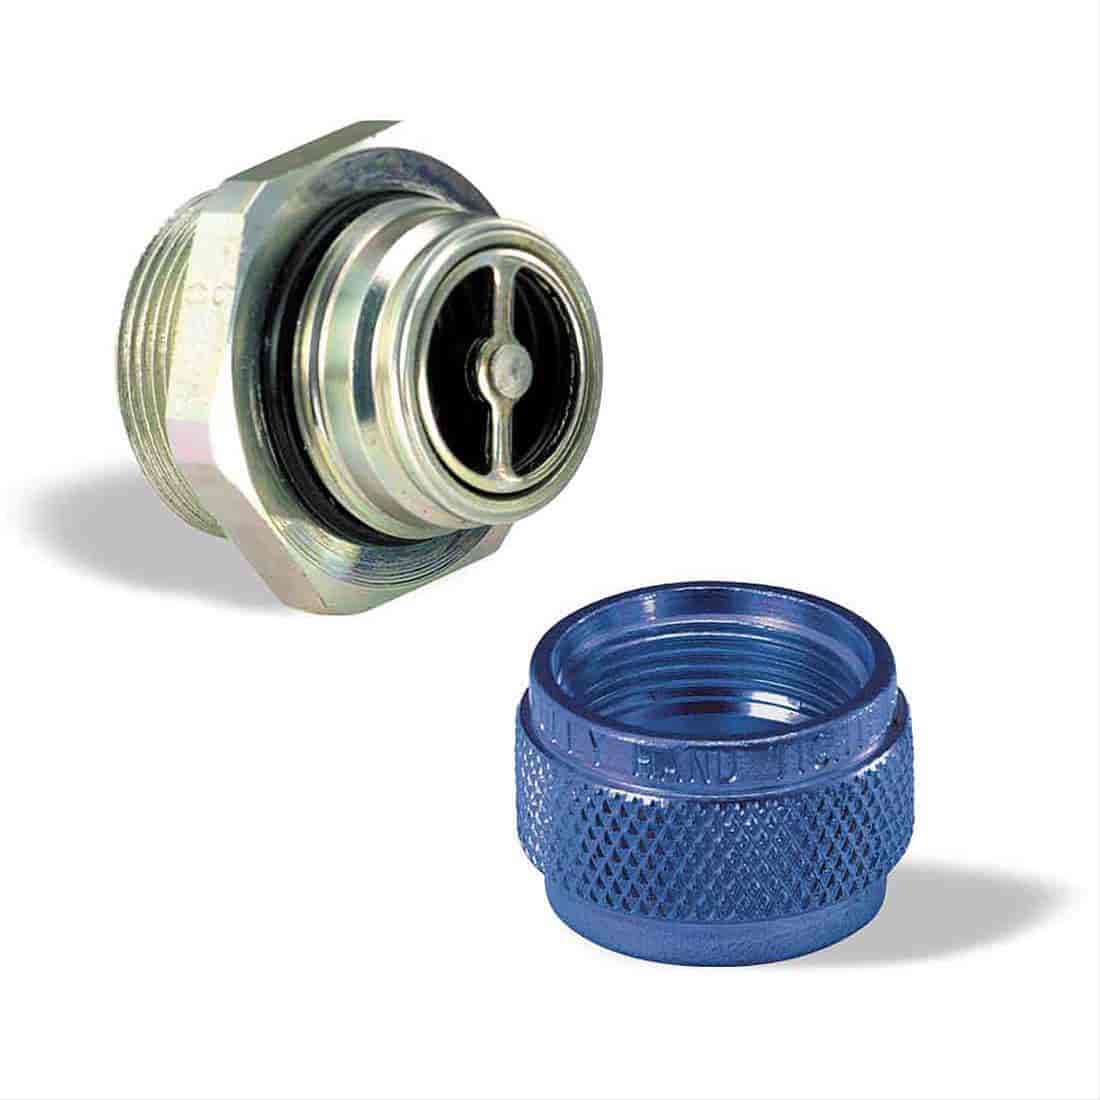 Male Half M14 x 1.5 Thread Size 1.52in.x.96in. 1-1/16 Hex Size - Quick-Drain Oil Pan Coupling